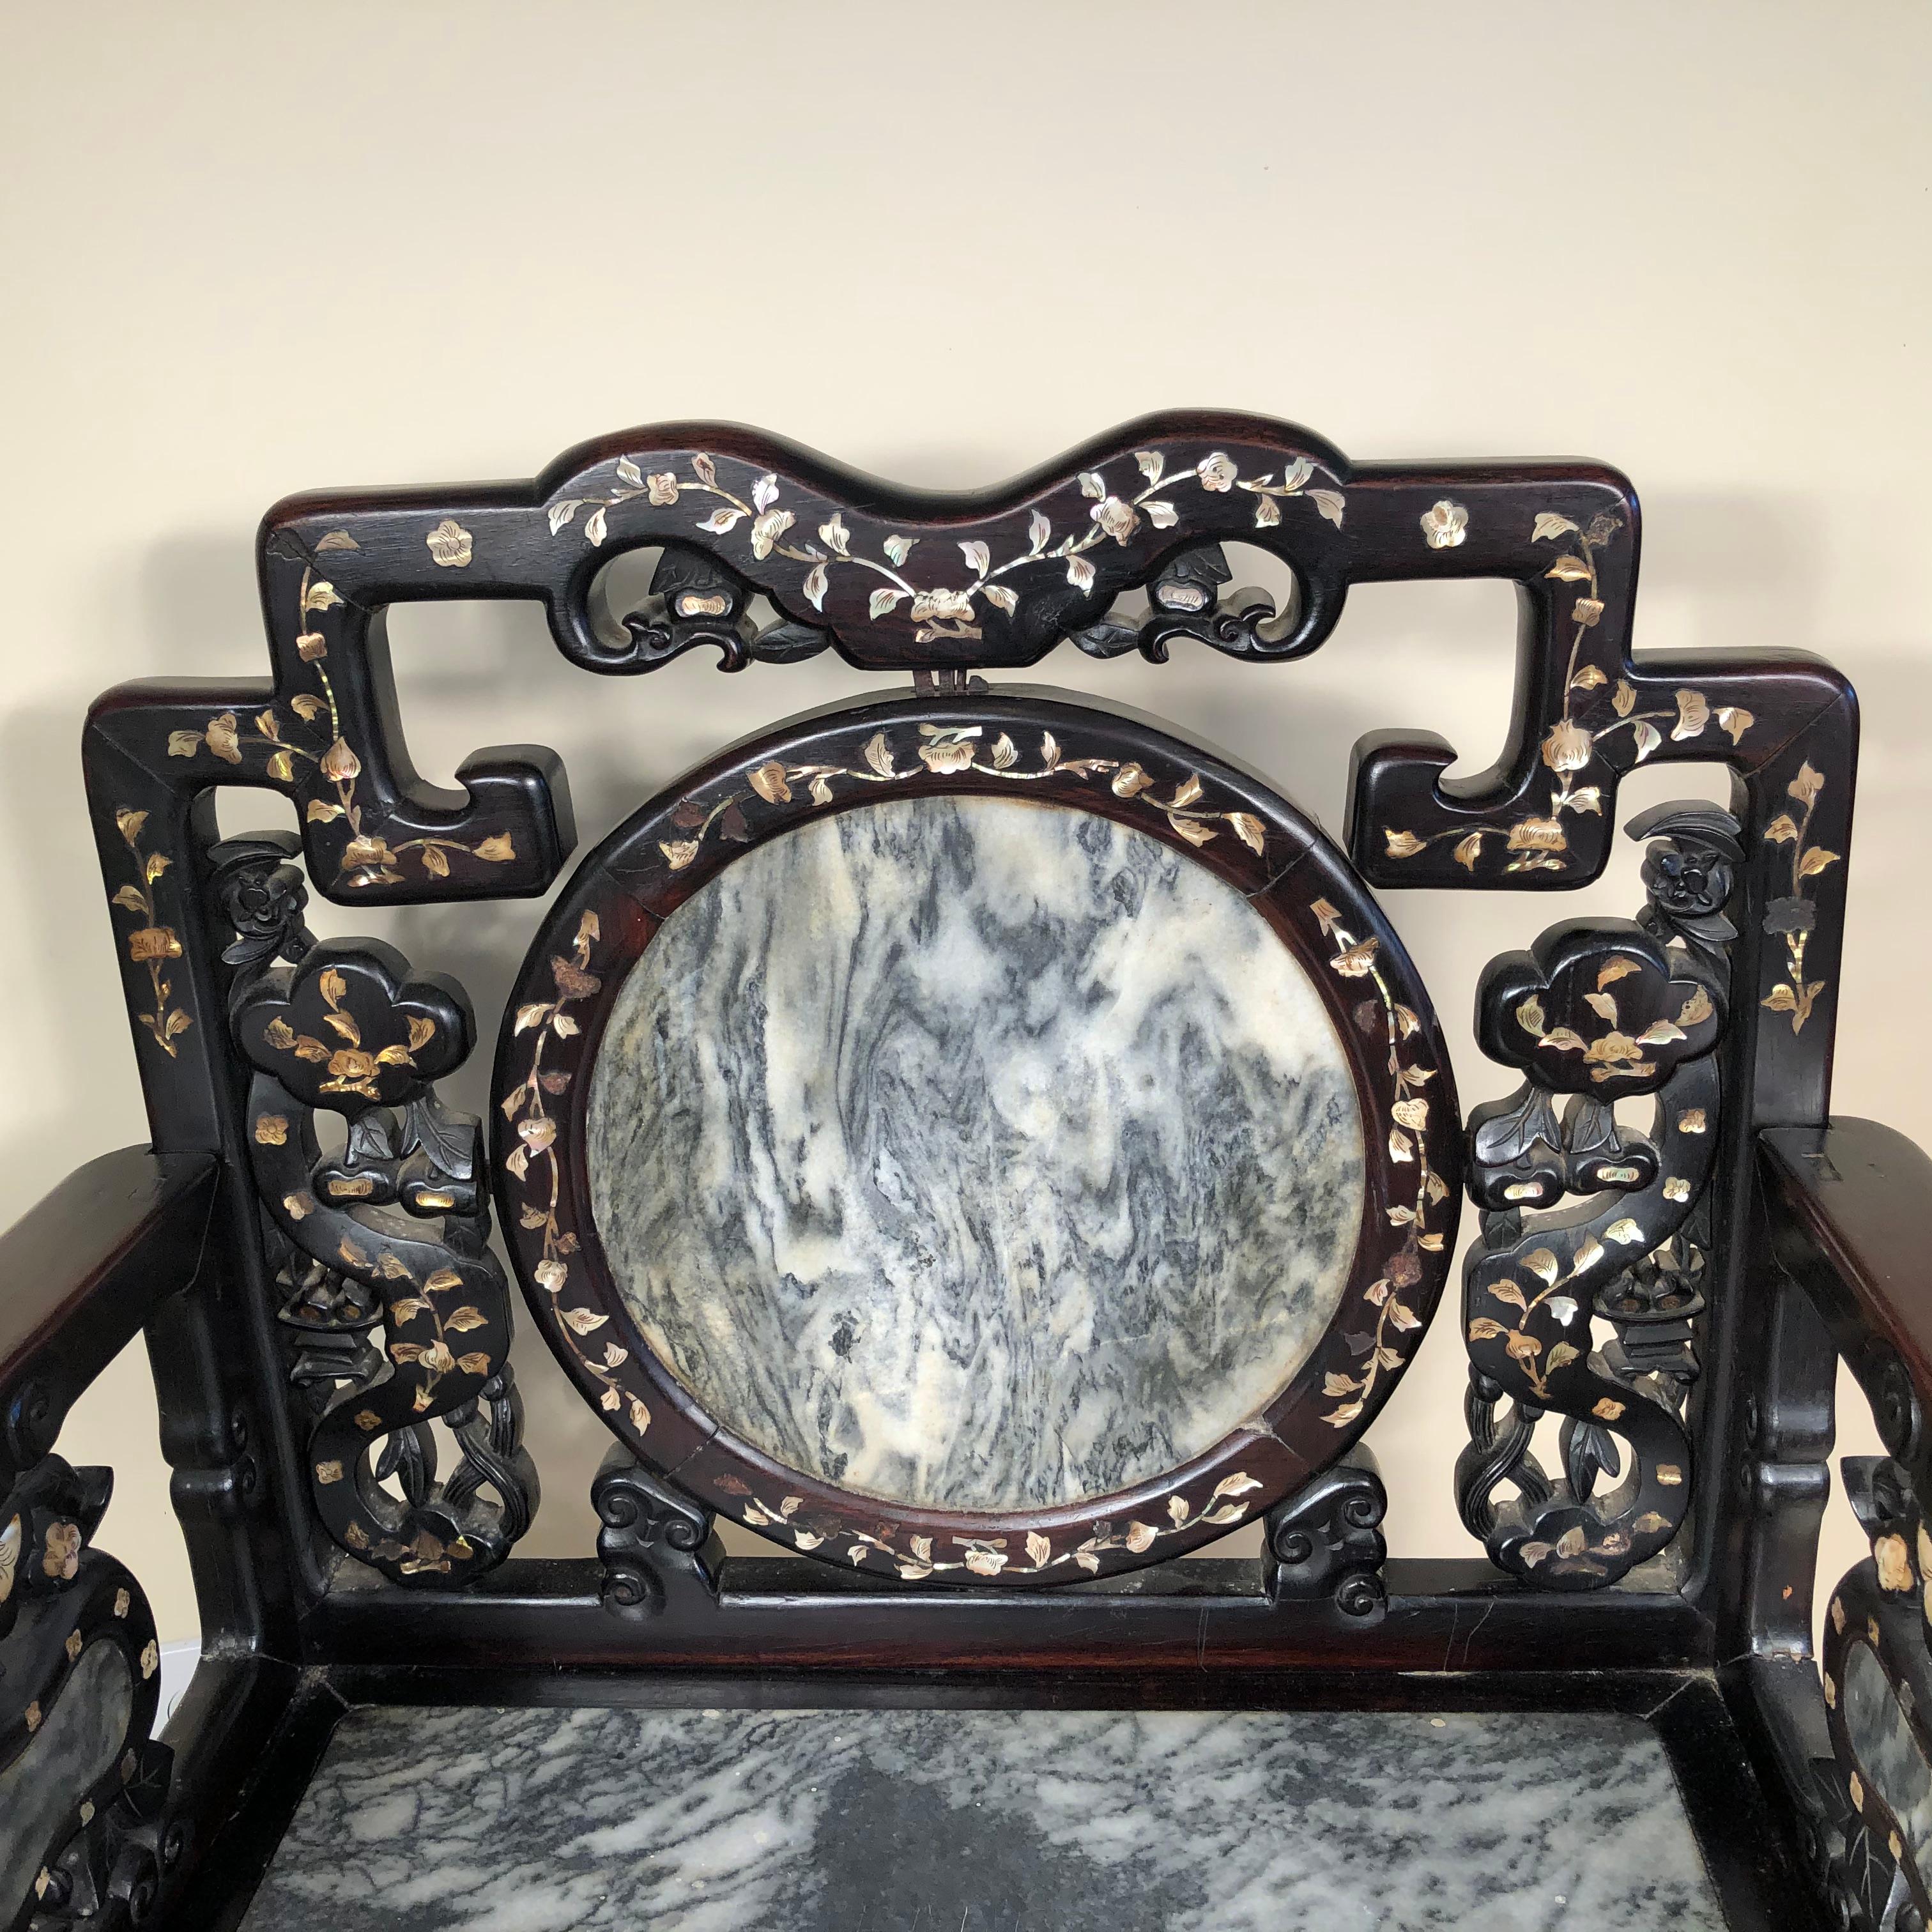 Finest Quality Dreamstone Inlaid Chair

China- an extraordinary prolifically crafted example of an antique hand carved hardwood chair inlaid with multiple natural dream stone 